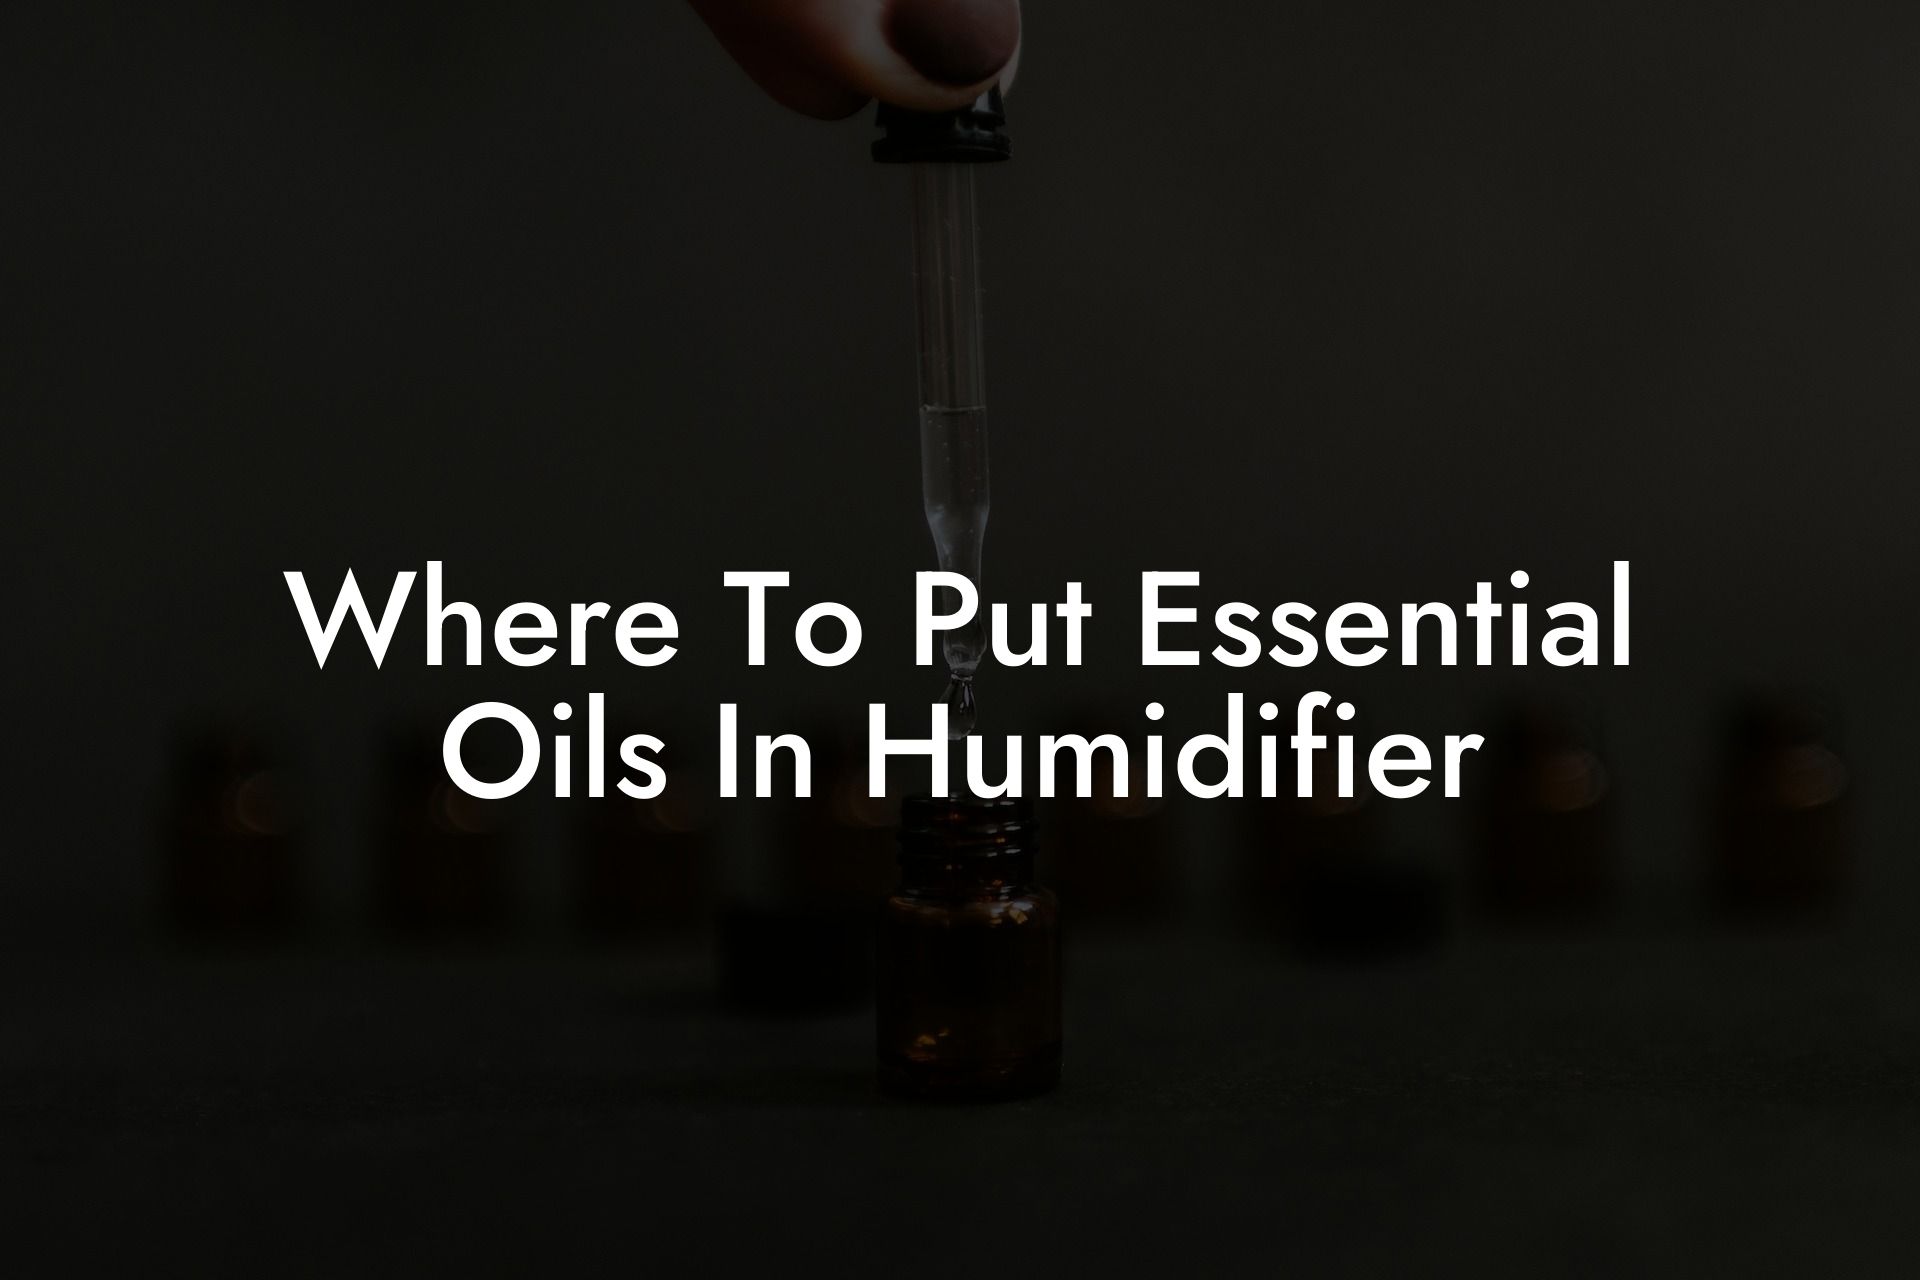 Where To Put Essential Oils In Humidifier